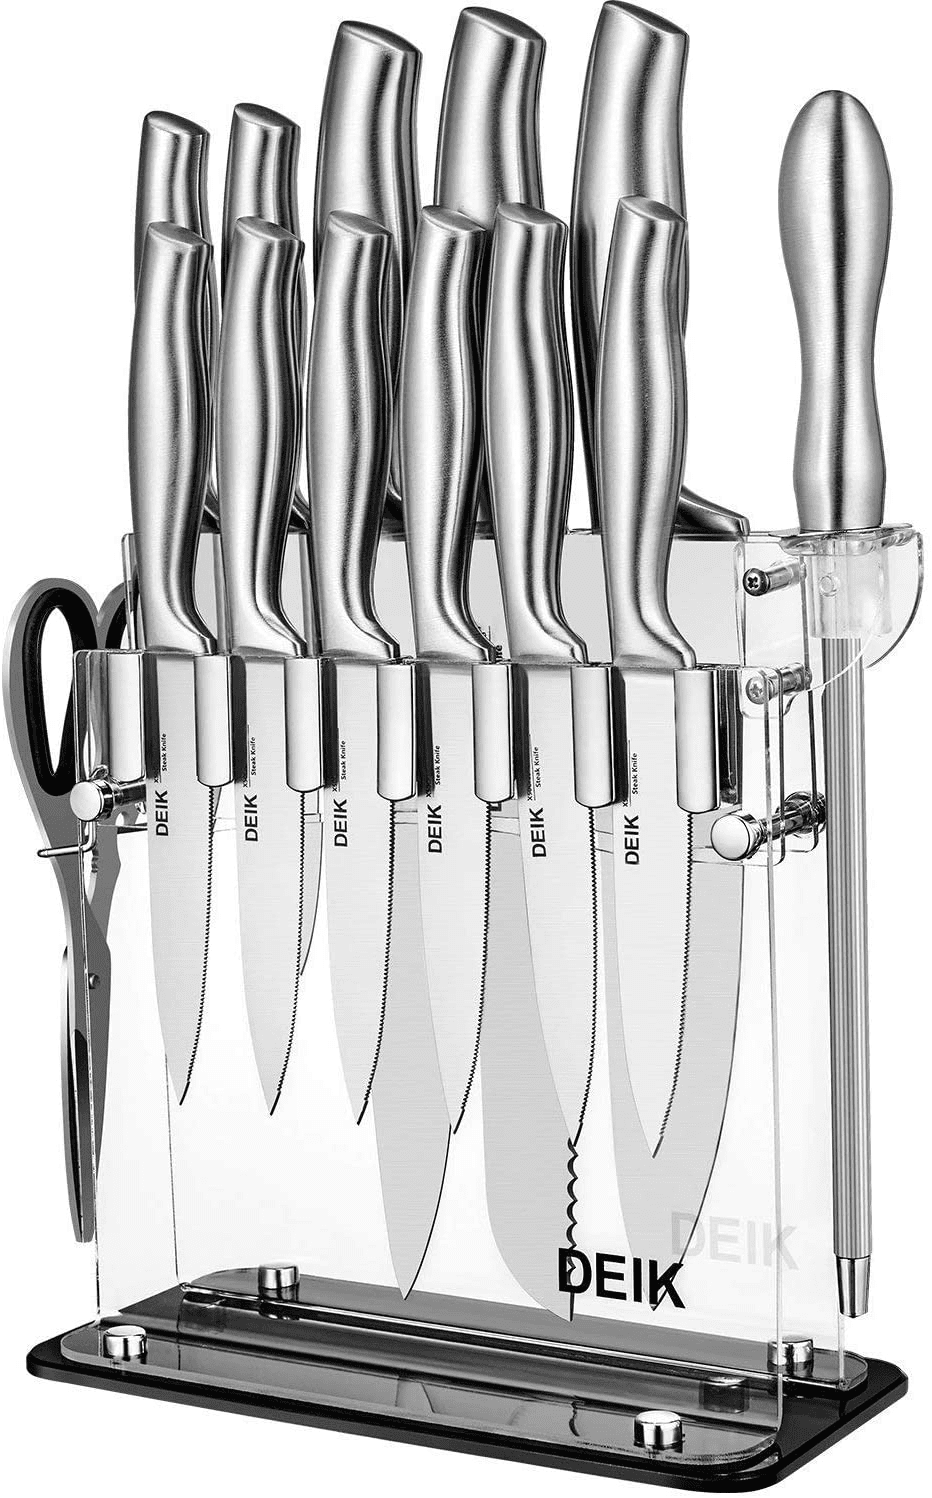 Deik Knife Set High Carbon Stainless Steel Kitchen Knife Set 14 Pieces Super Sharp Cutlery Knife Set with Acrylic Stand - Silver